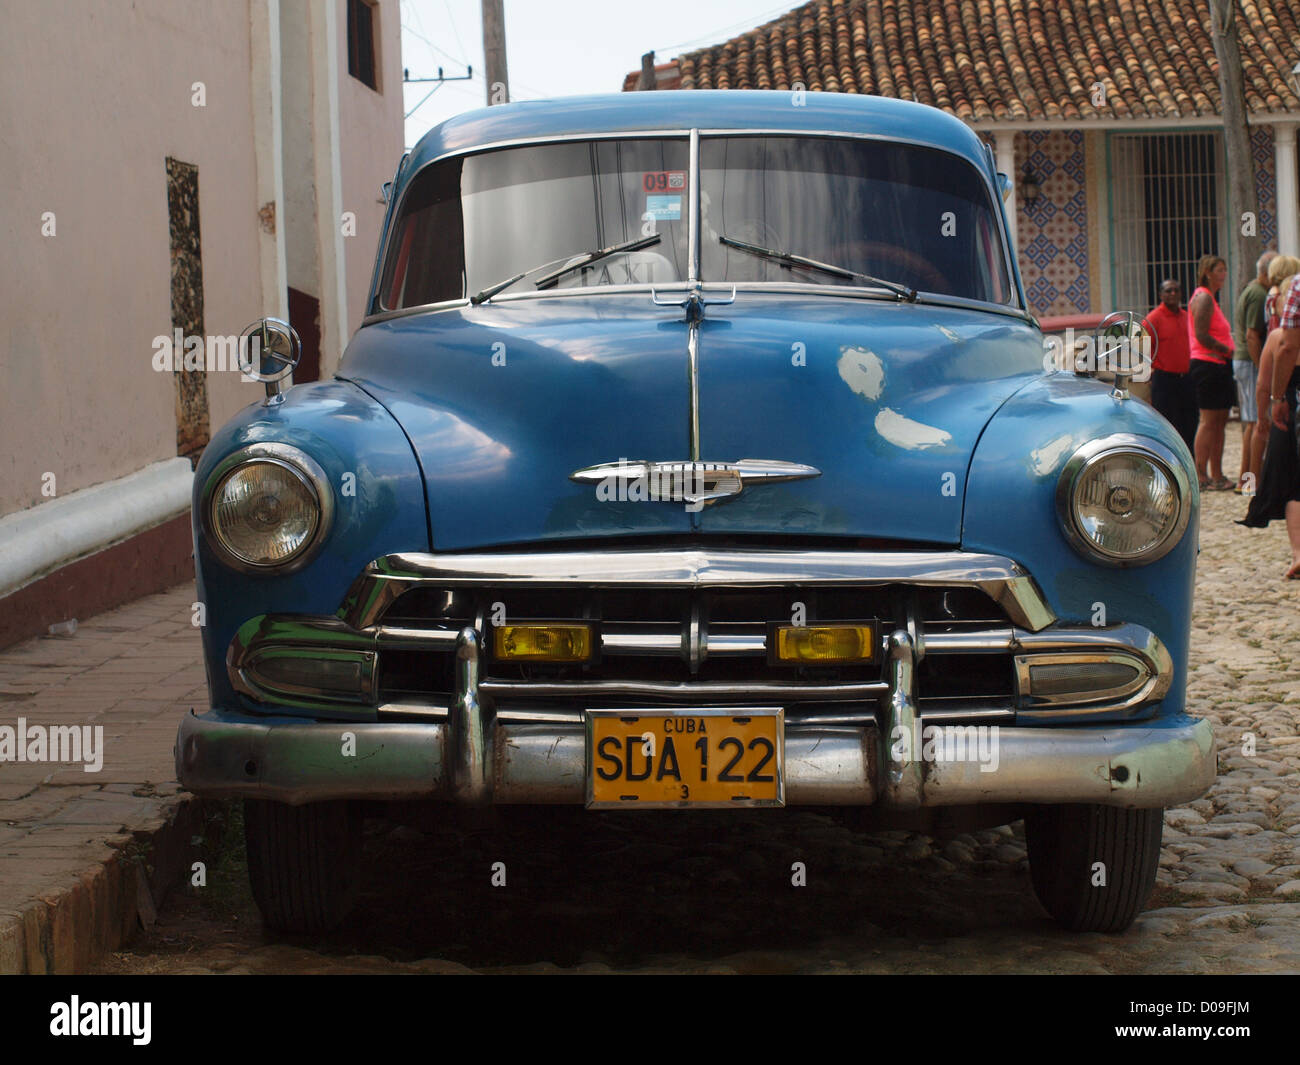 Blue classic 1950s American car in Trinidad Cuba parked in typical Cuban street Stock Photo